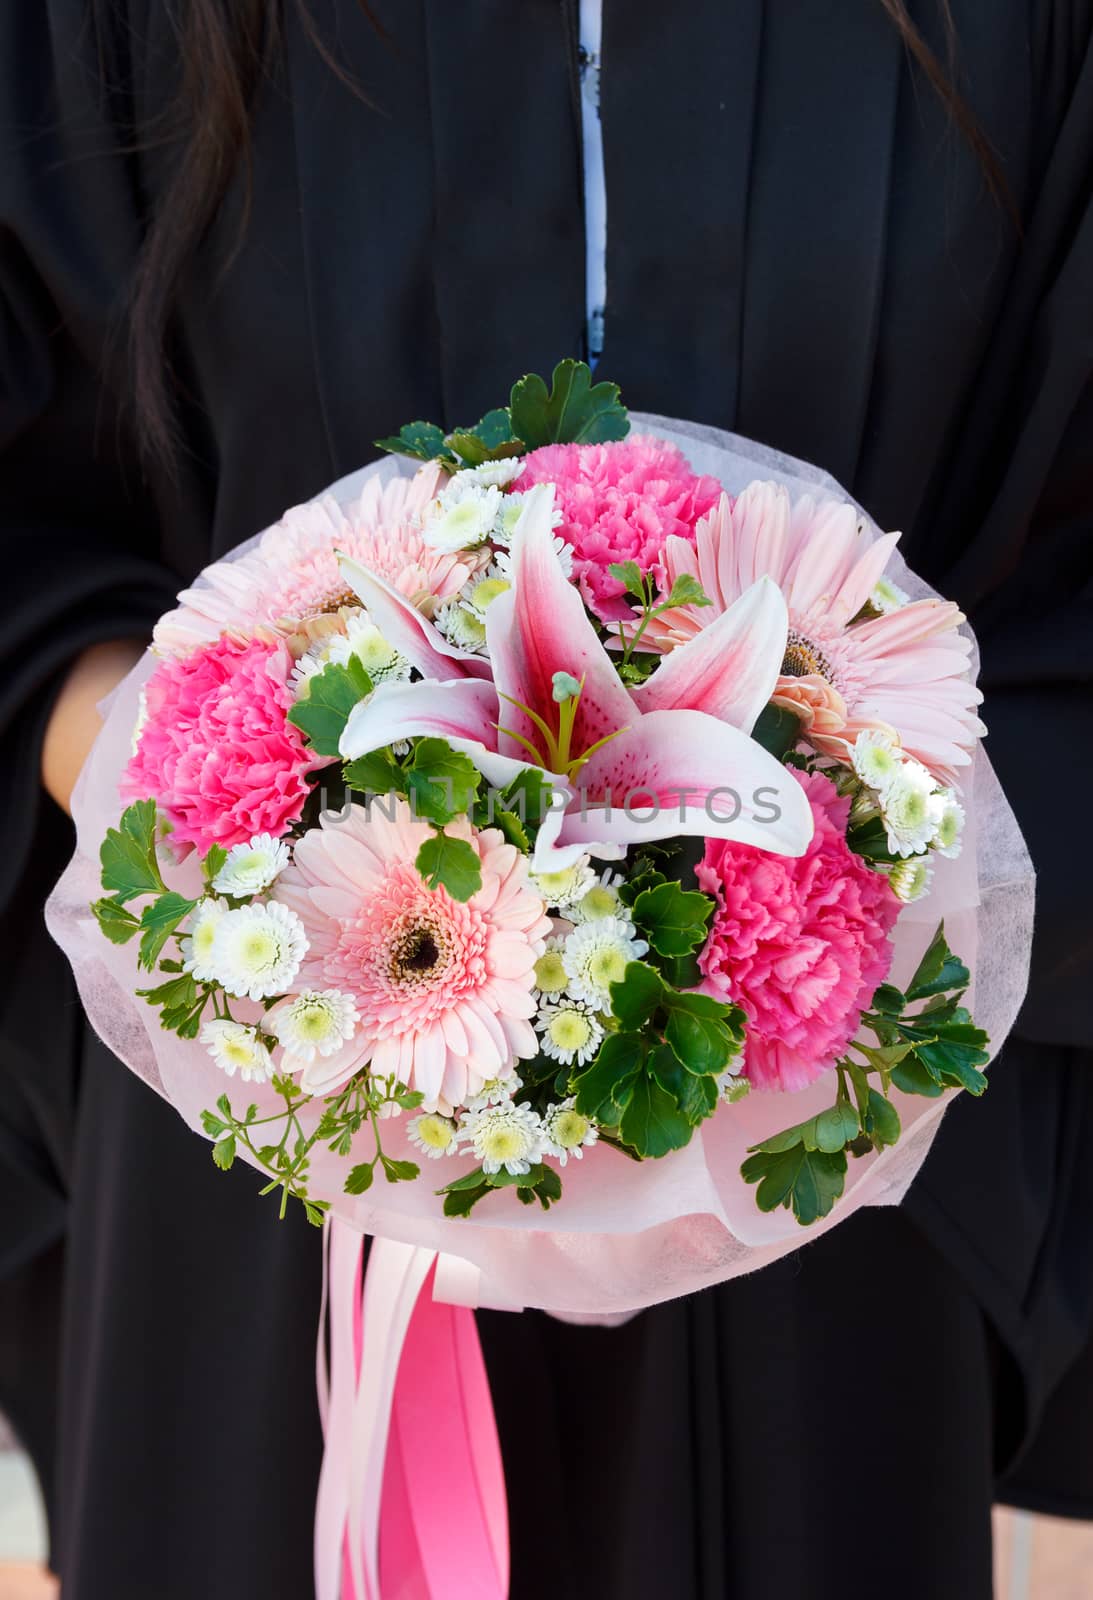 People hold bouquet of colorful flowers including Lily.